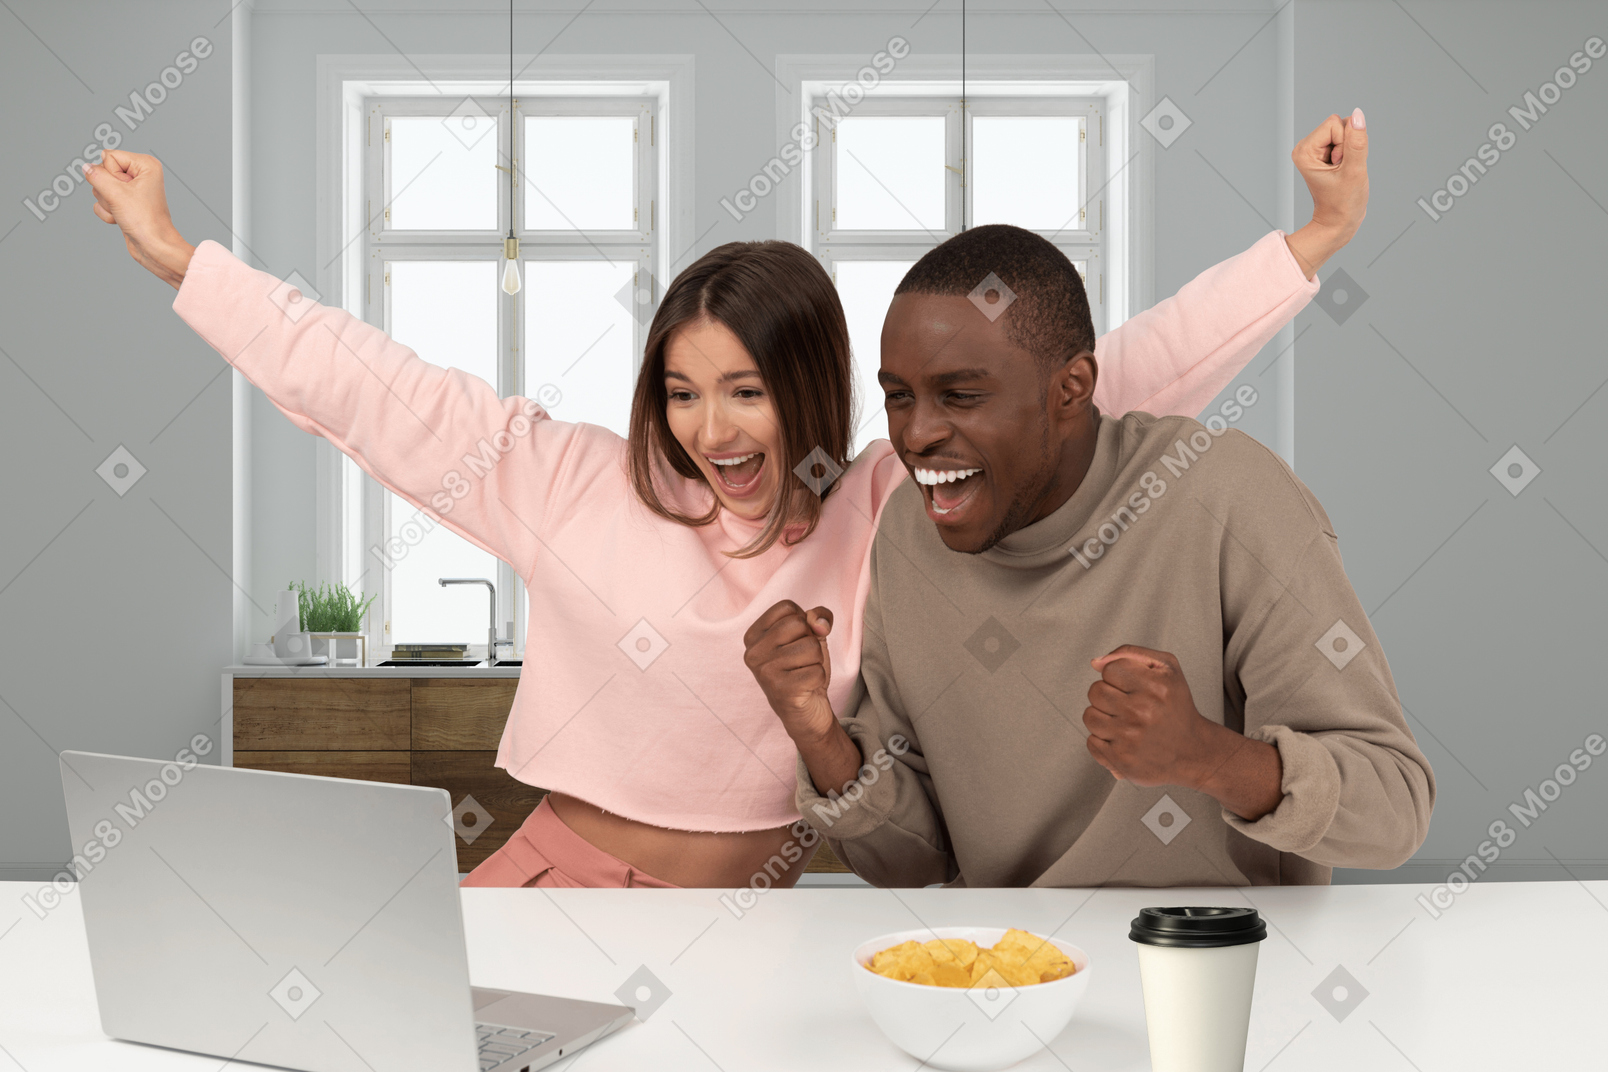 Excited young couple looking at laptop screen